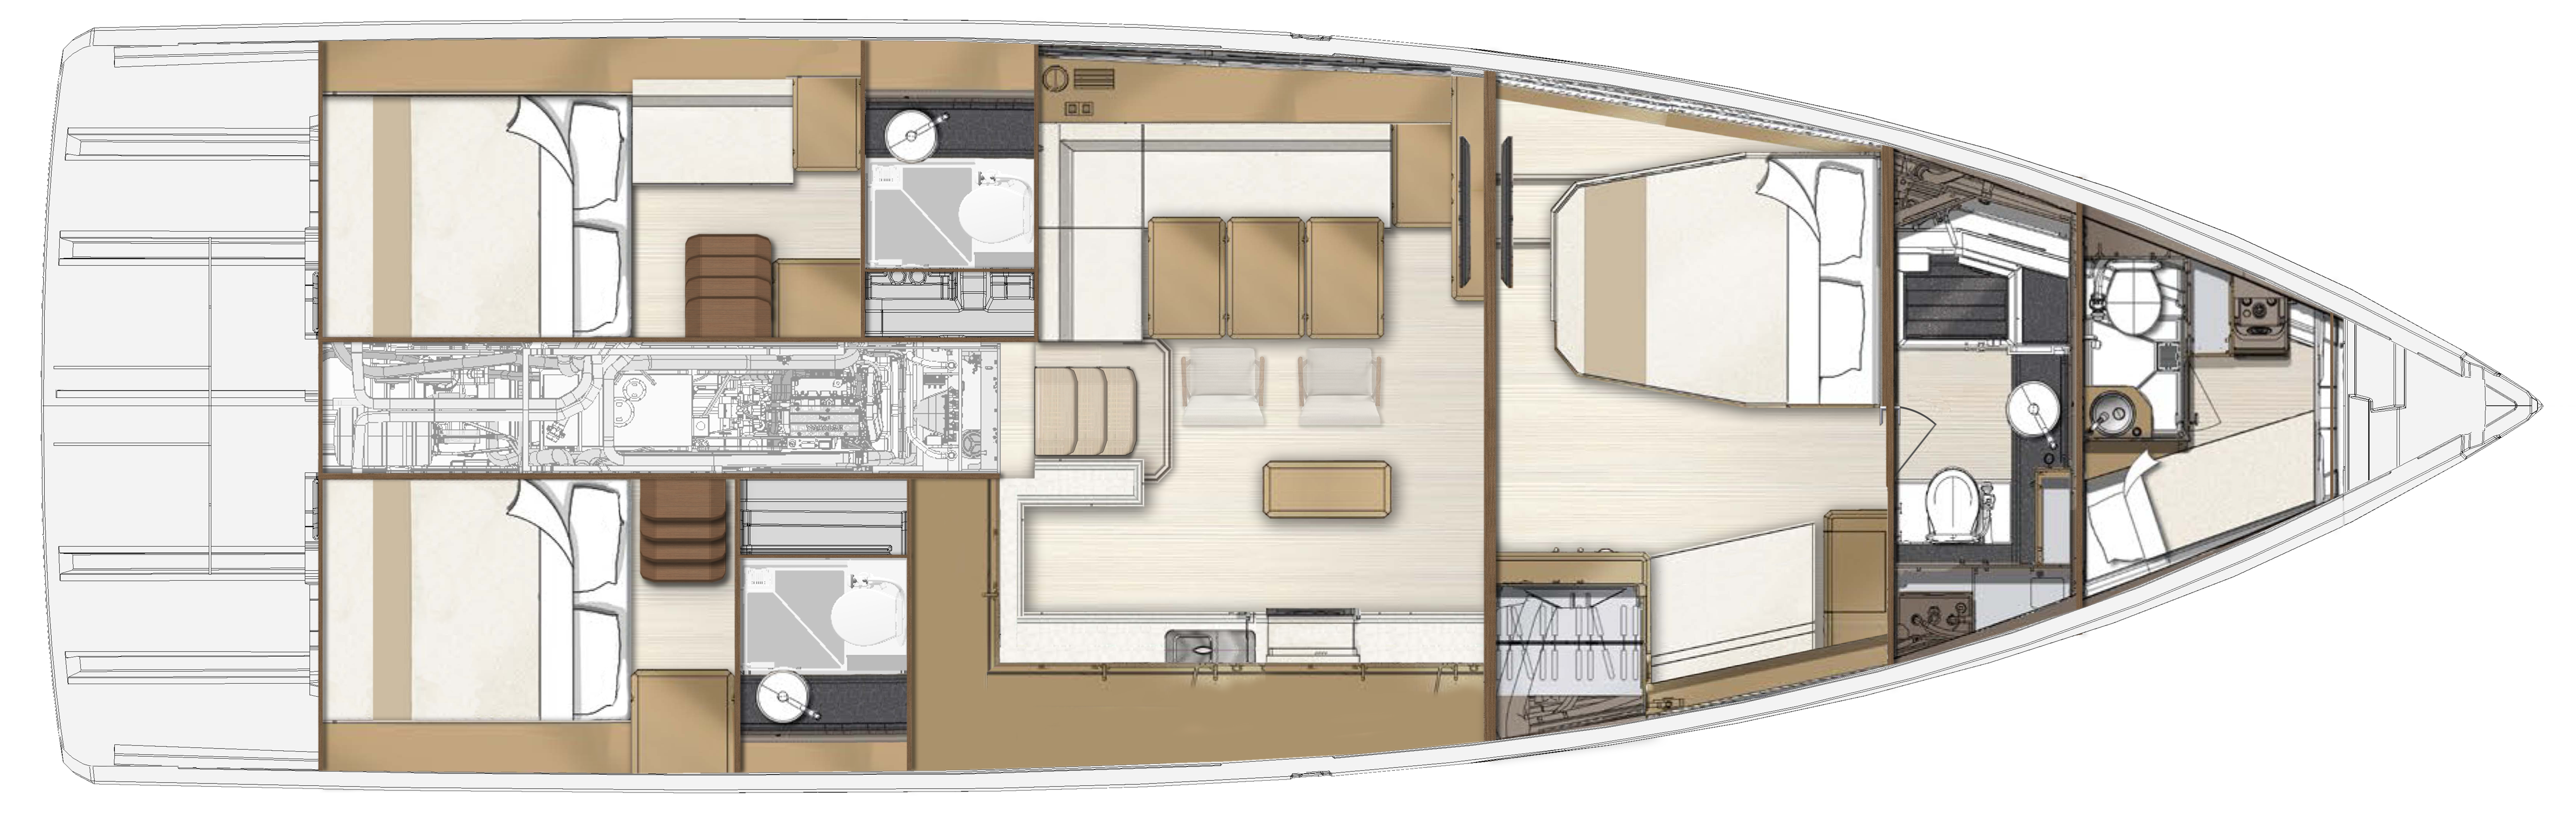 An illustration of the interior layout of the Jeanneau 55, showing the innovative cabin and living area designs.